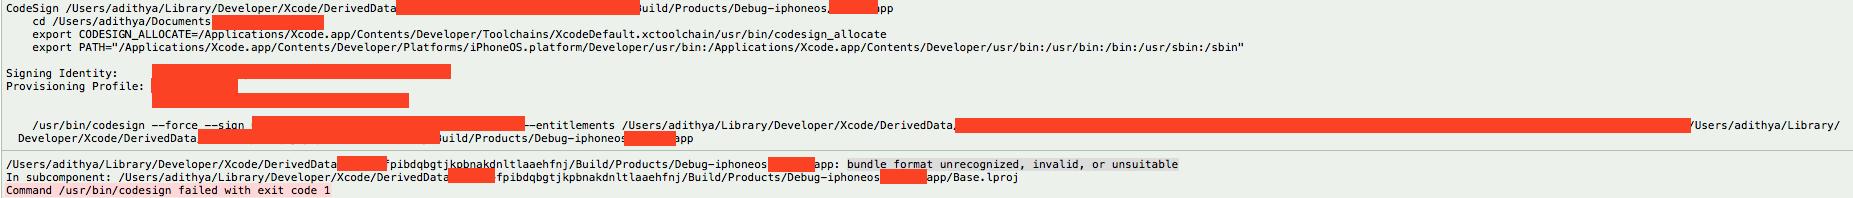 xcode error object file format unrecognized invalid or unsuitable